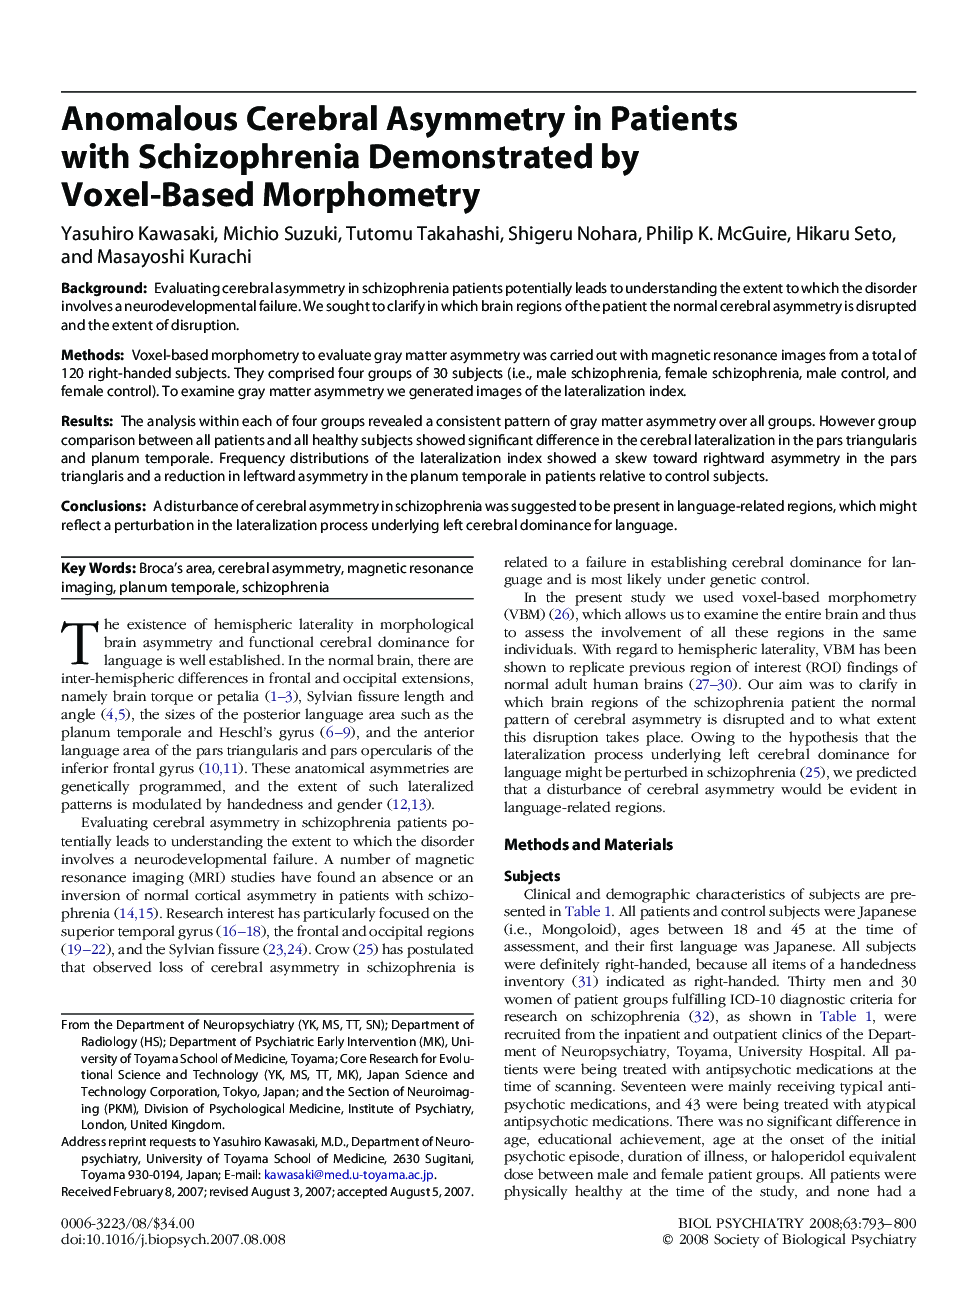 Anomalous Cerebral Asymmetry in Patients with Schizophrenia Demonstrated by Voxel-Based Morphometry